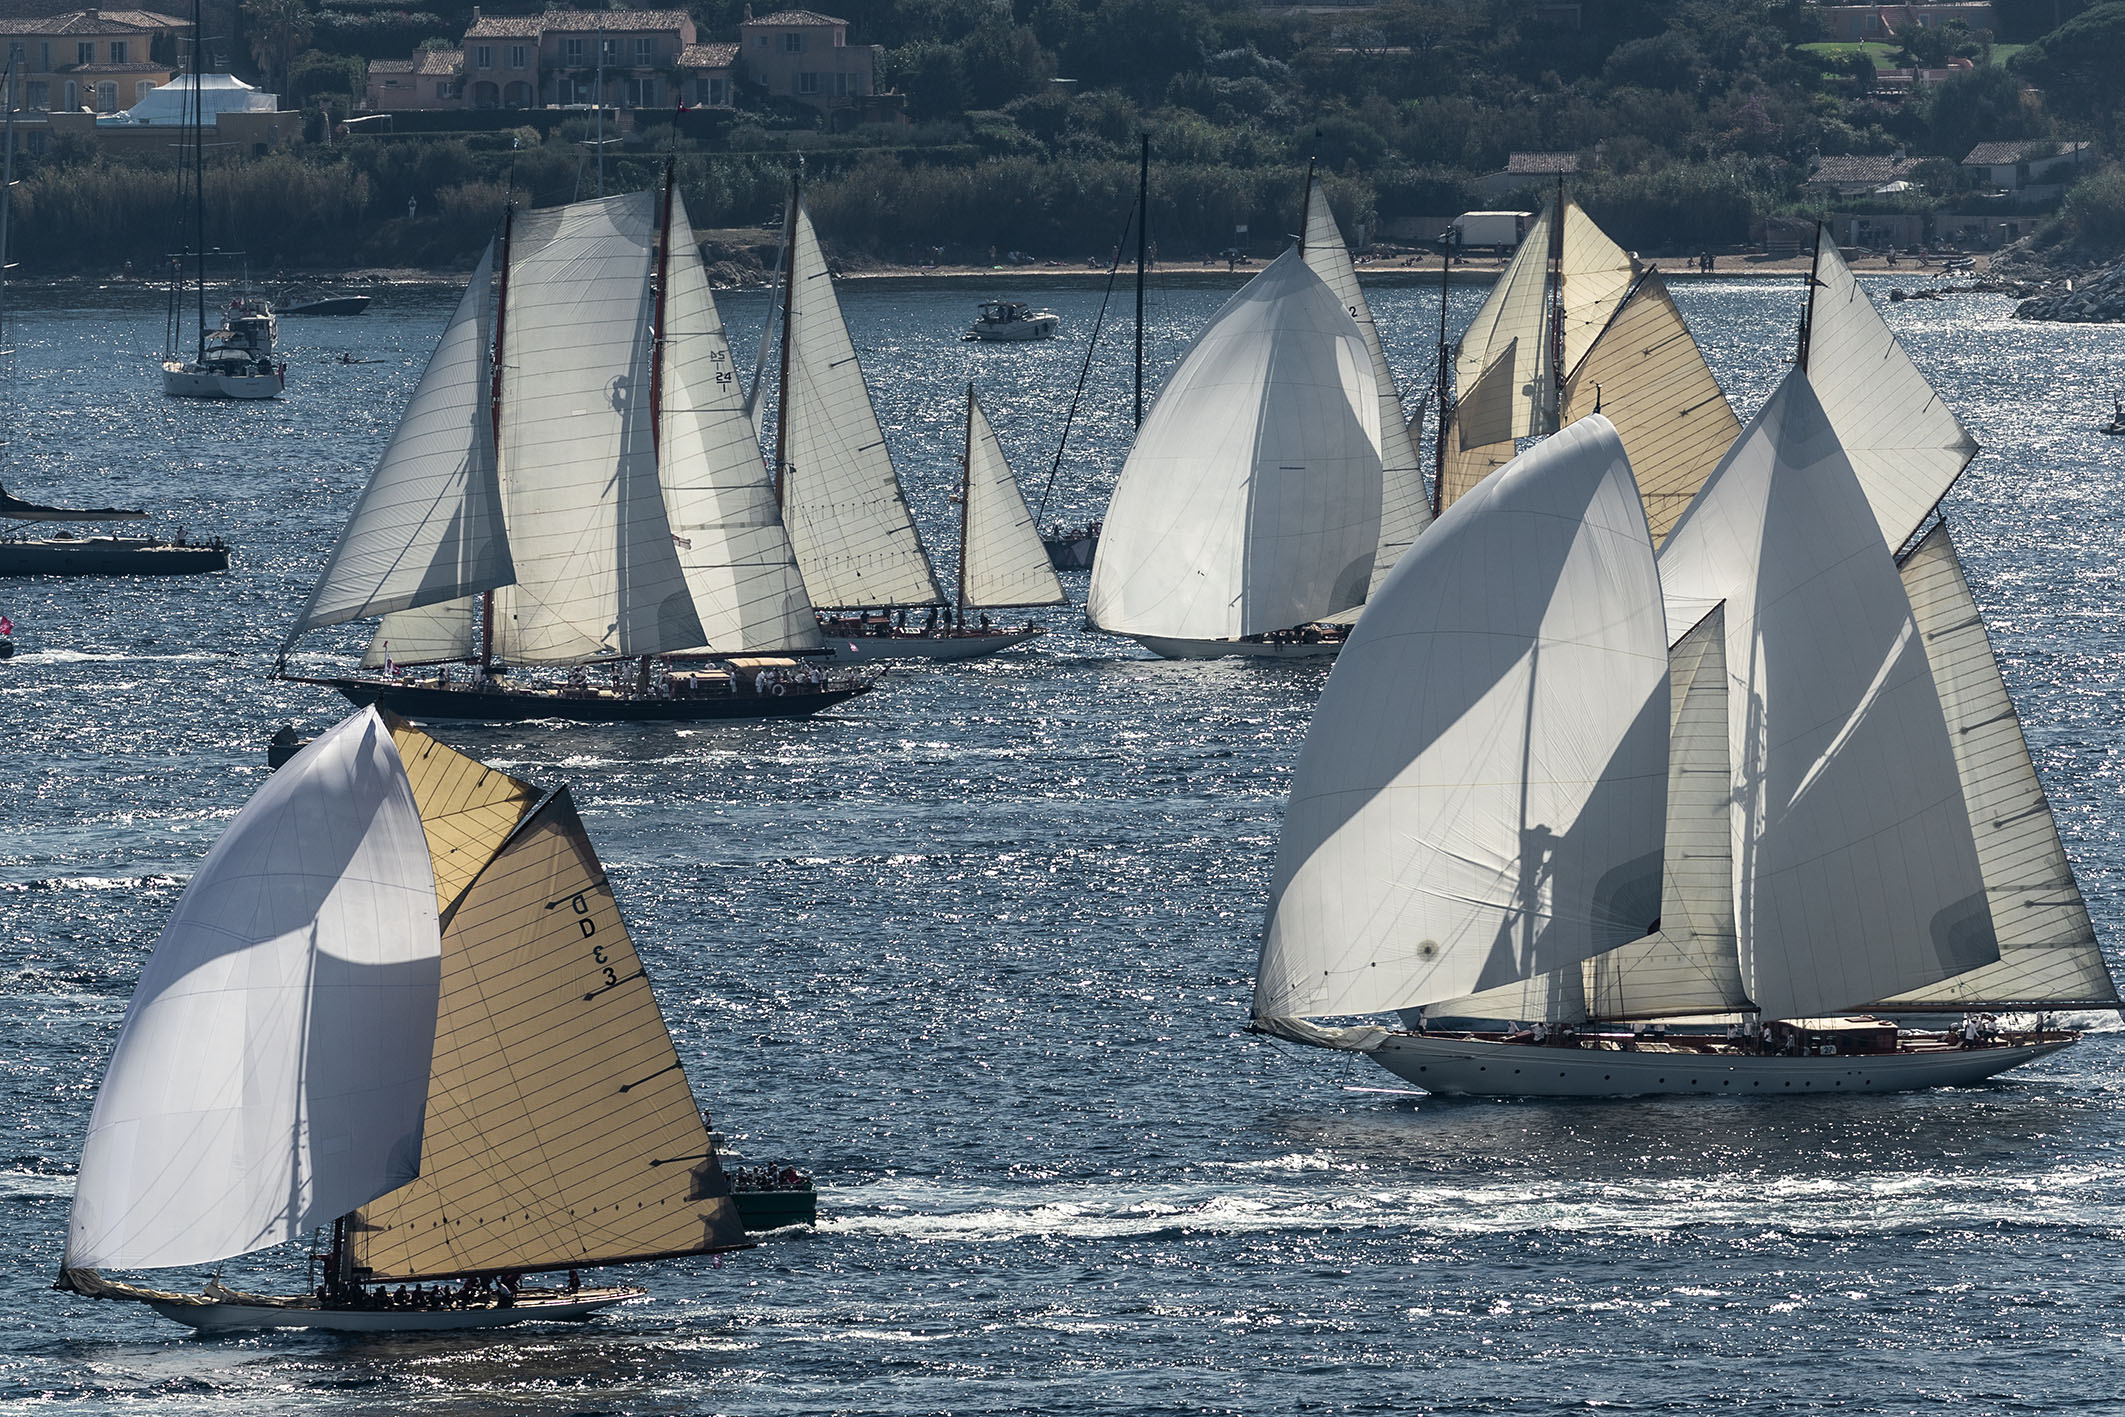 The magic of Les Voiles omnipresent!